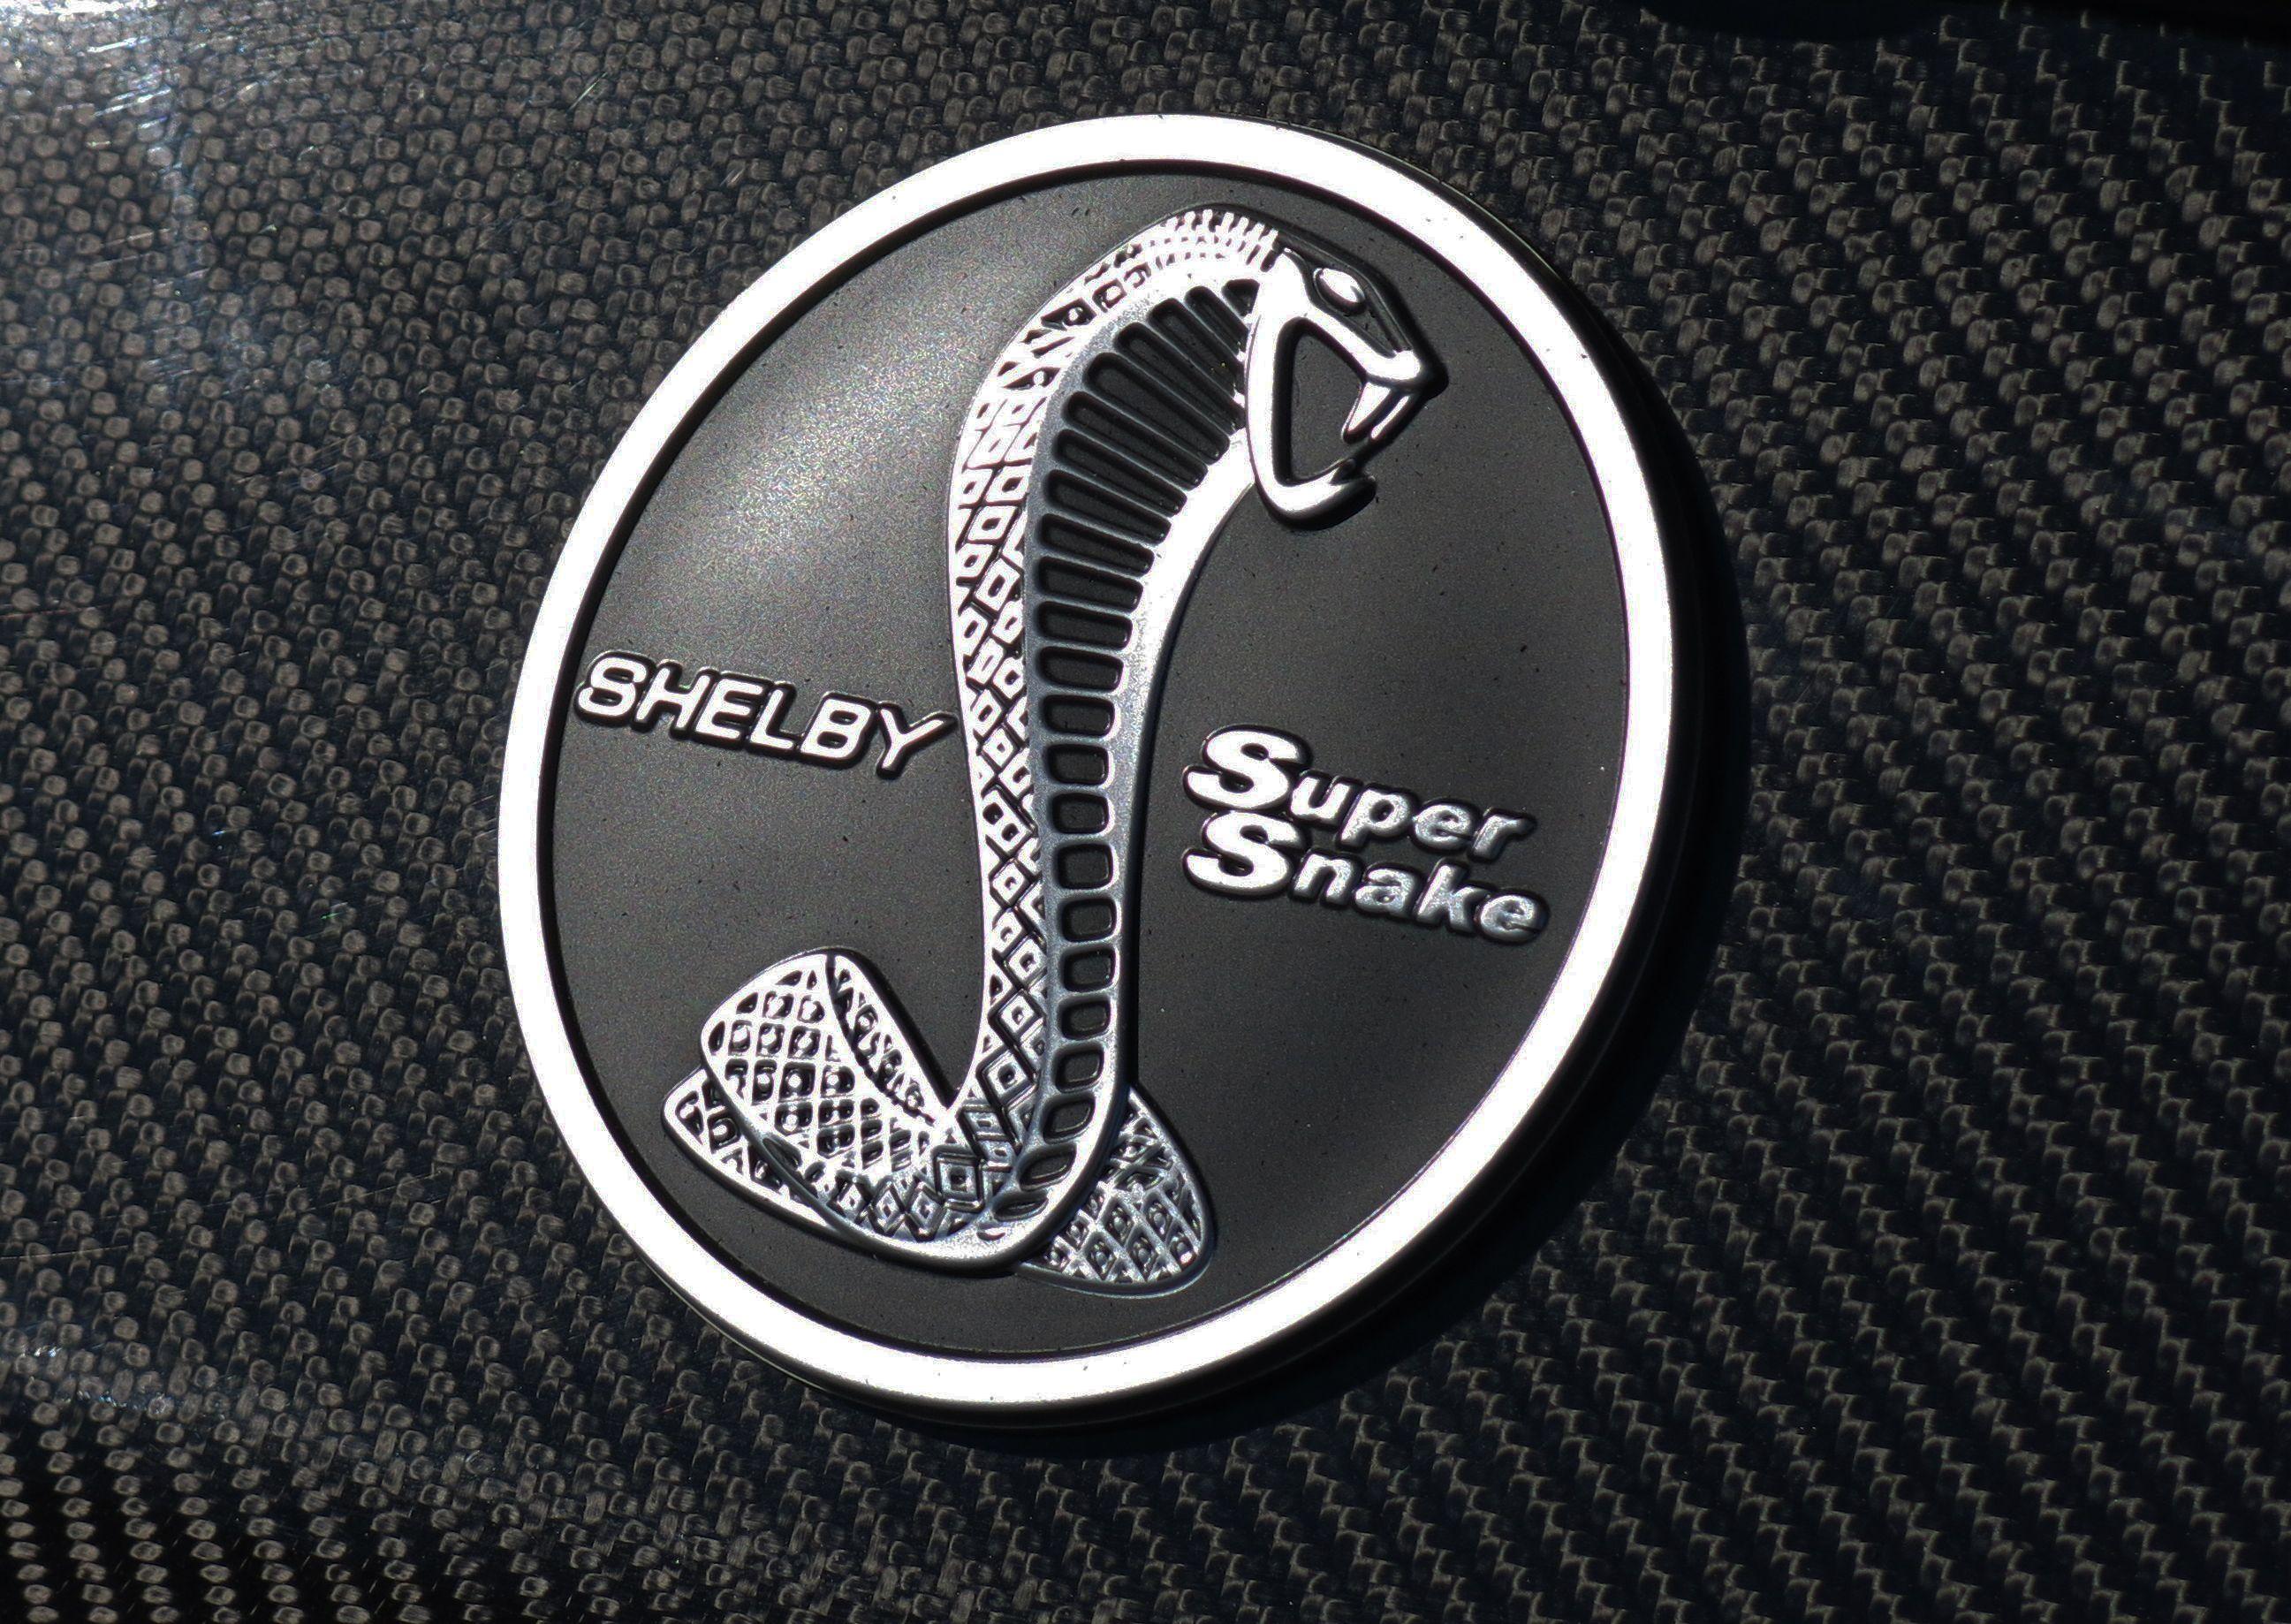 Super Snake Logo - 2016 Shelby Super Snake Review – Charming the Right Serpent